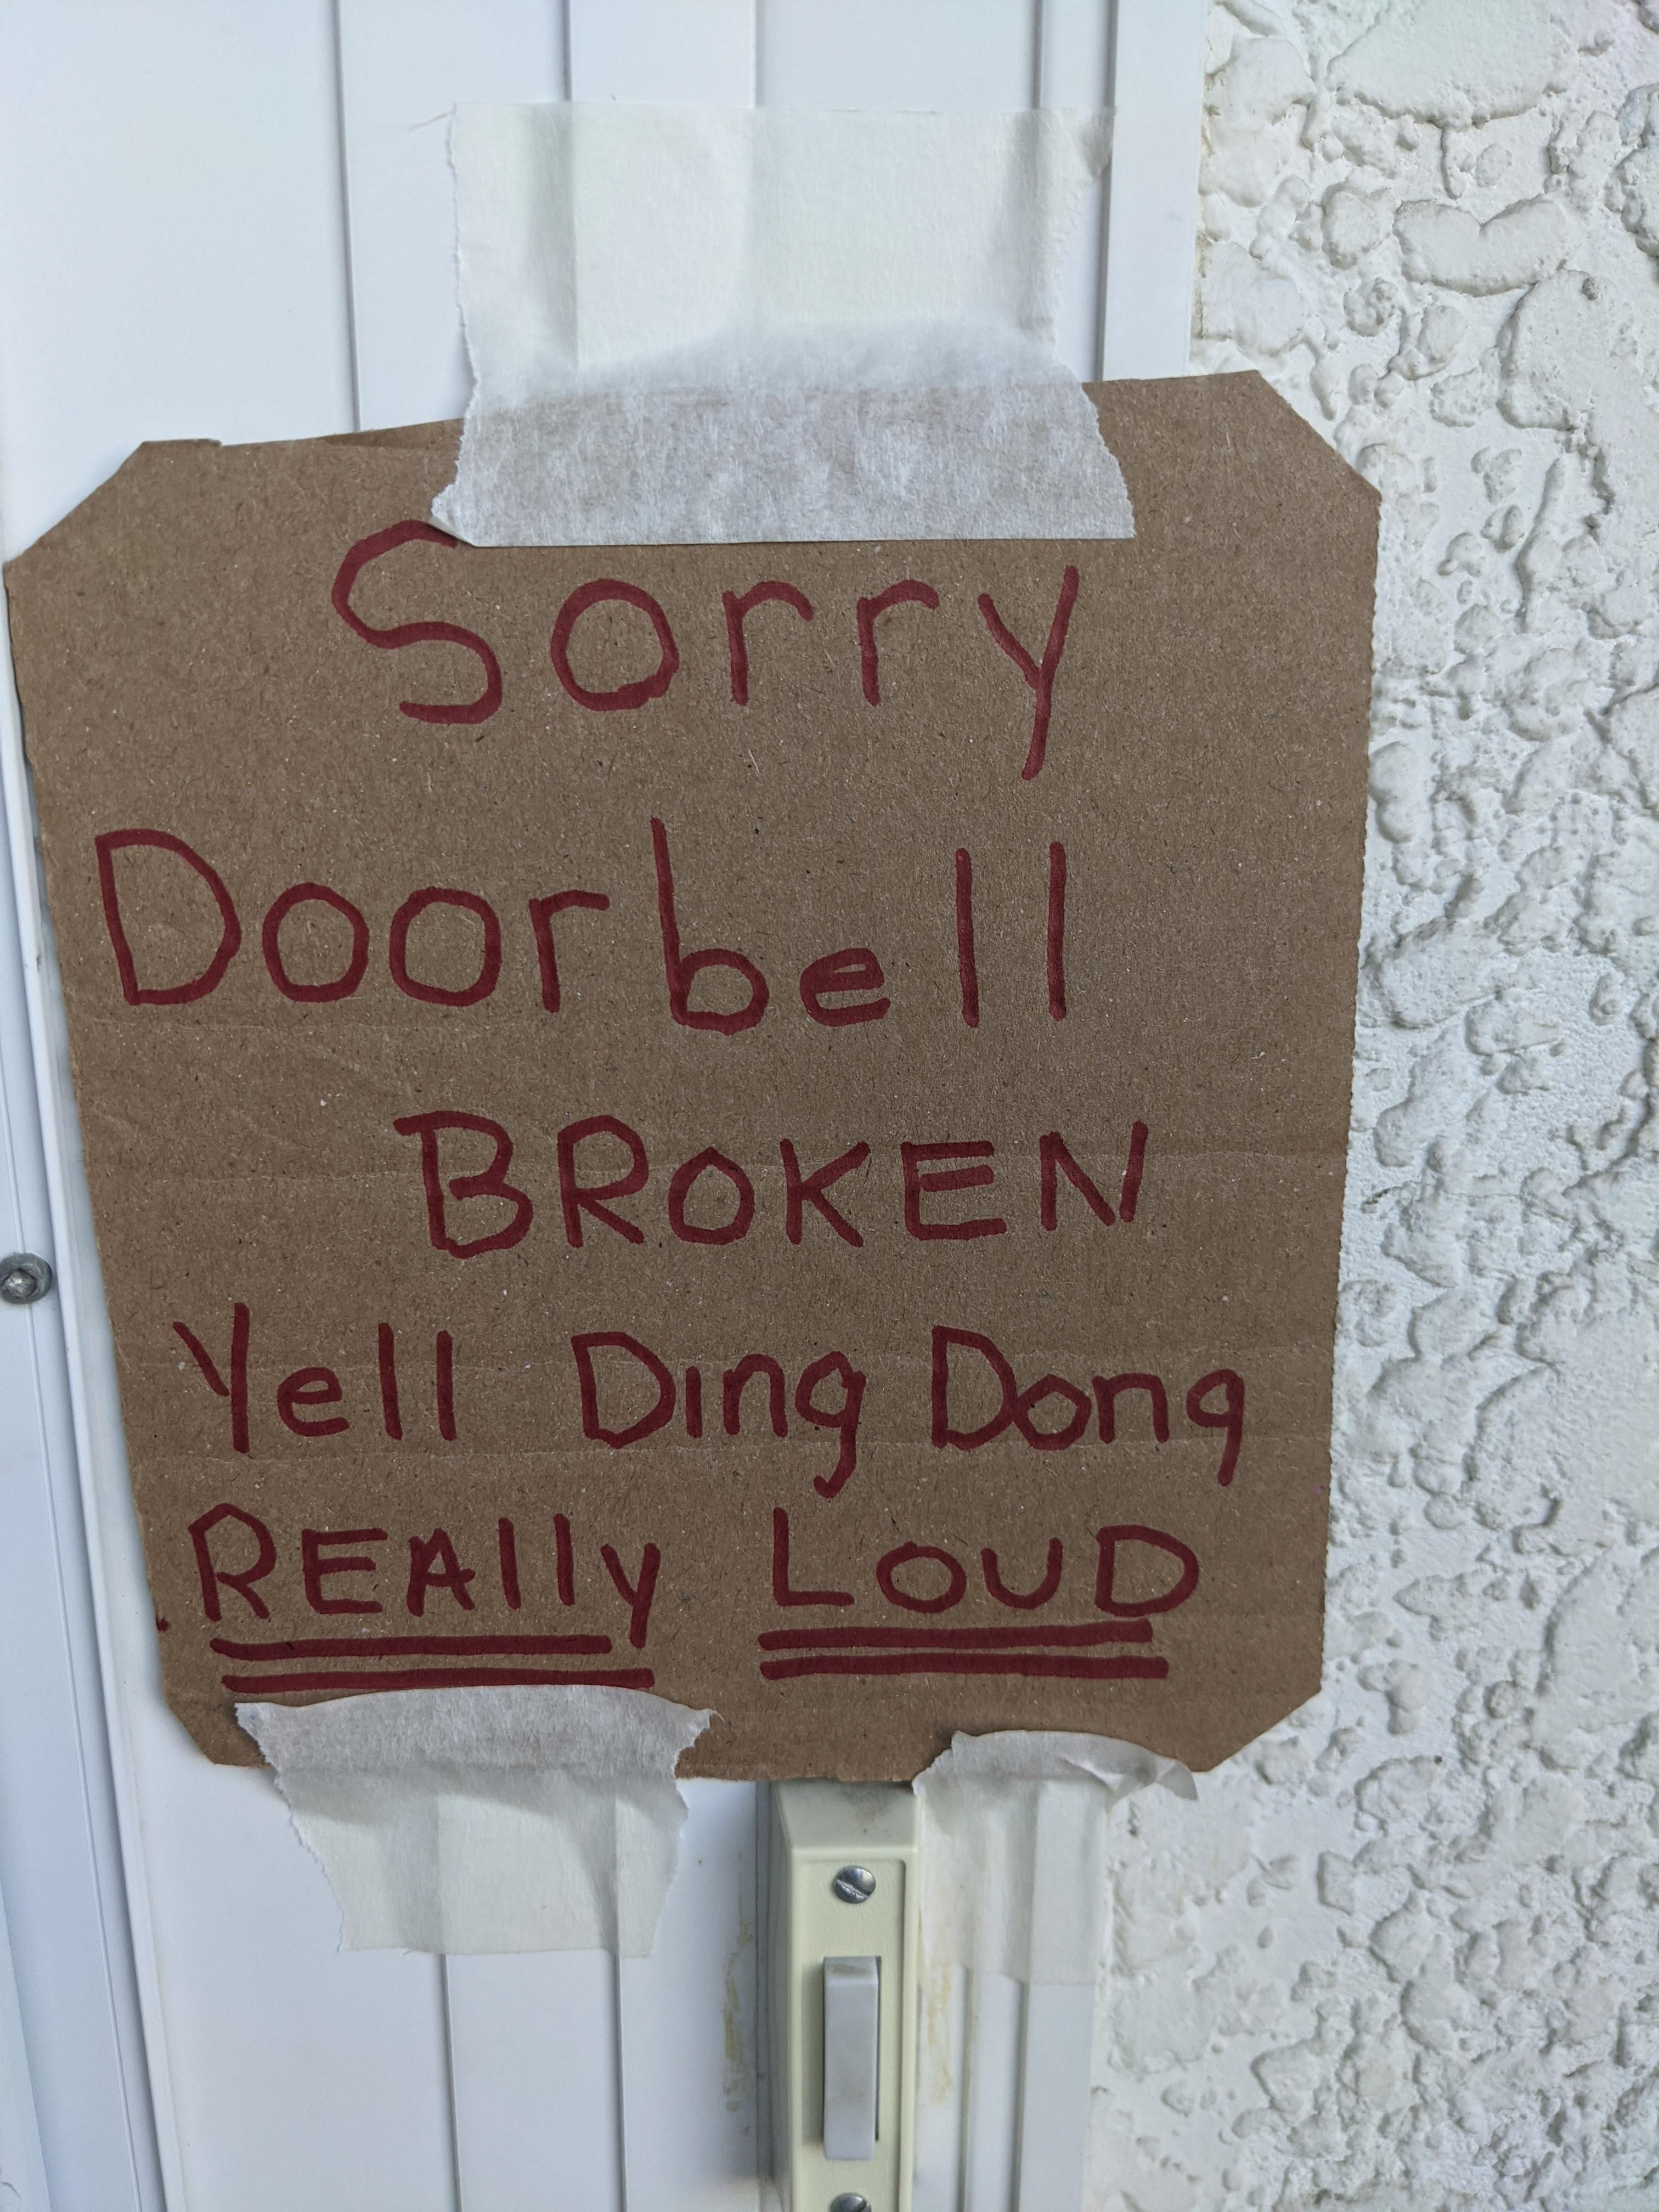 My neighbour put this above his doorbell